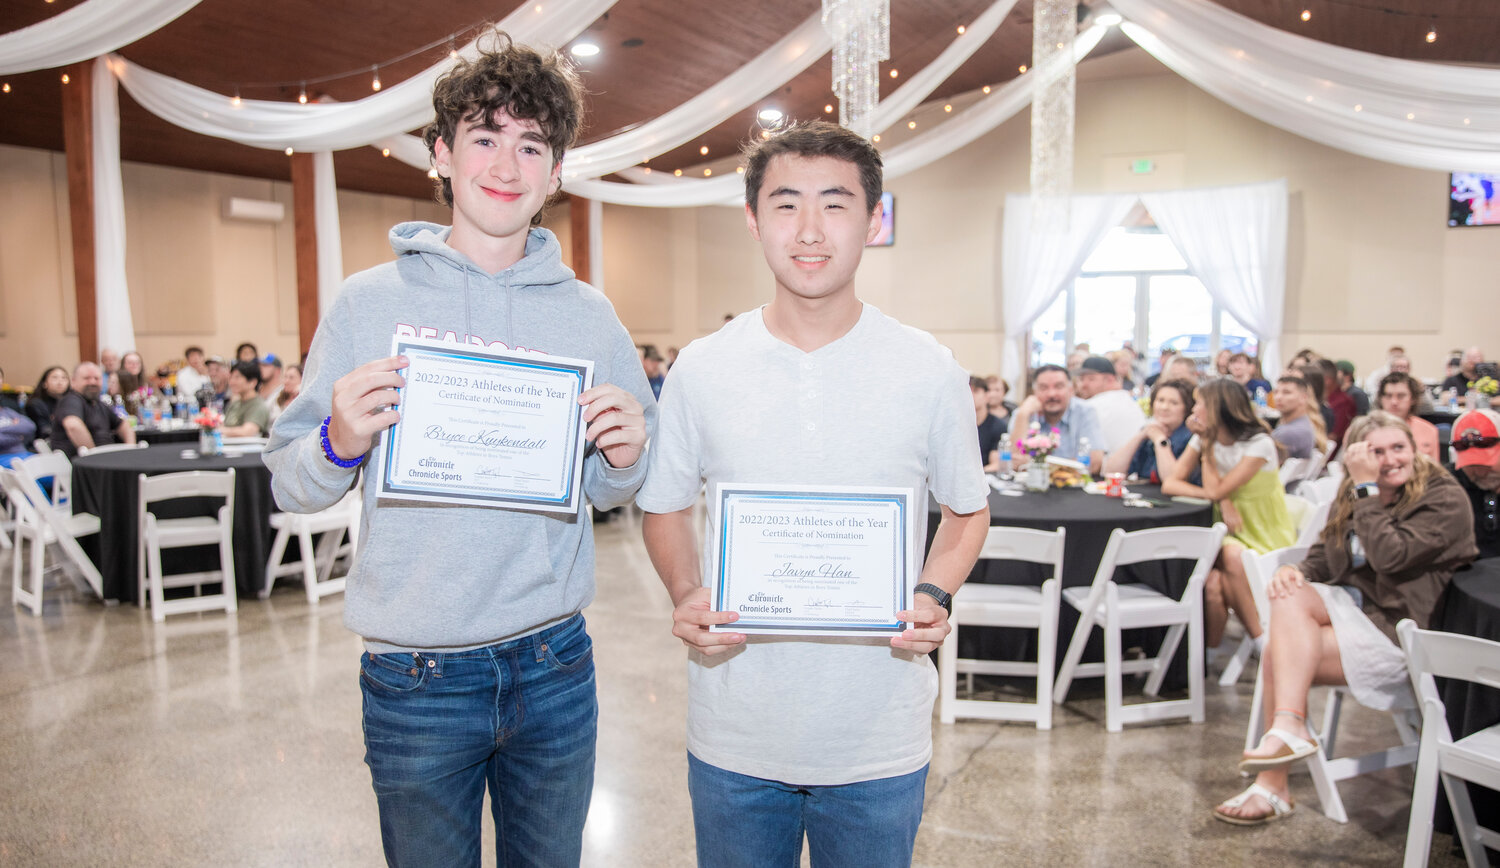 Bearcat tennis standouts Javyn Han and Bryce Kuykendall smile for a photo Tuesday evening during the “Athletes of the Year” banquet at the Jester Auto Museum. Though the pair lost in the district semis, Han and Kuykendall battled through the consolation bracket to finish third in the tournament and earn a State berth in Seattle.